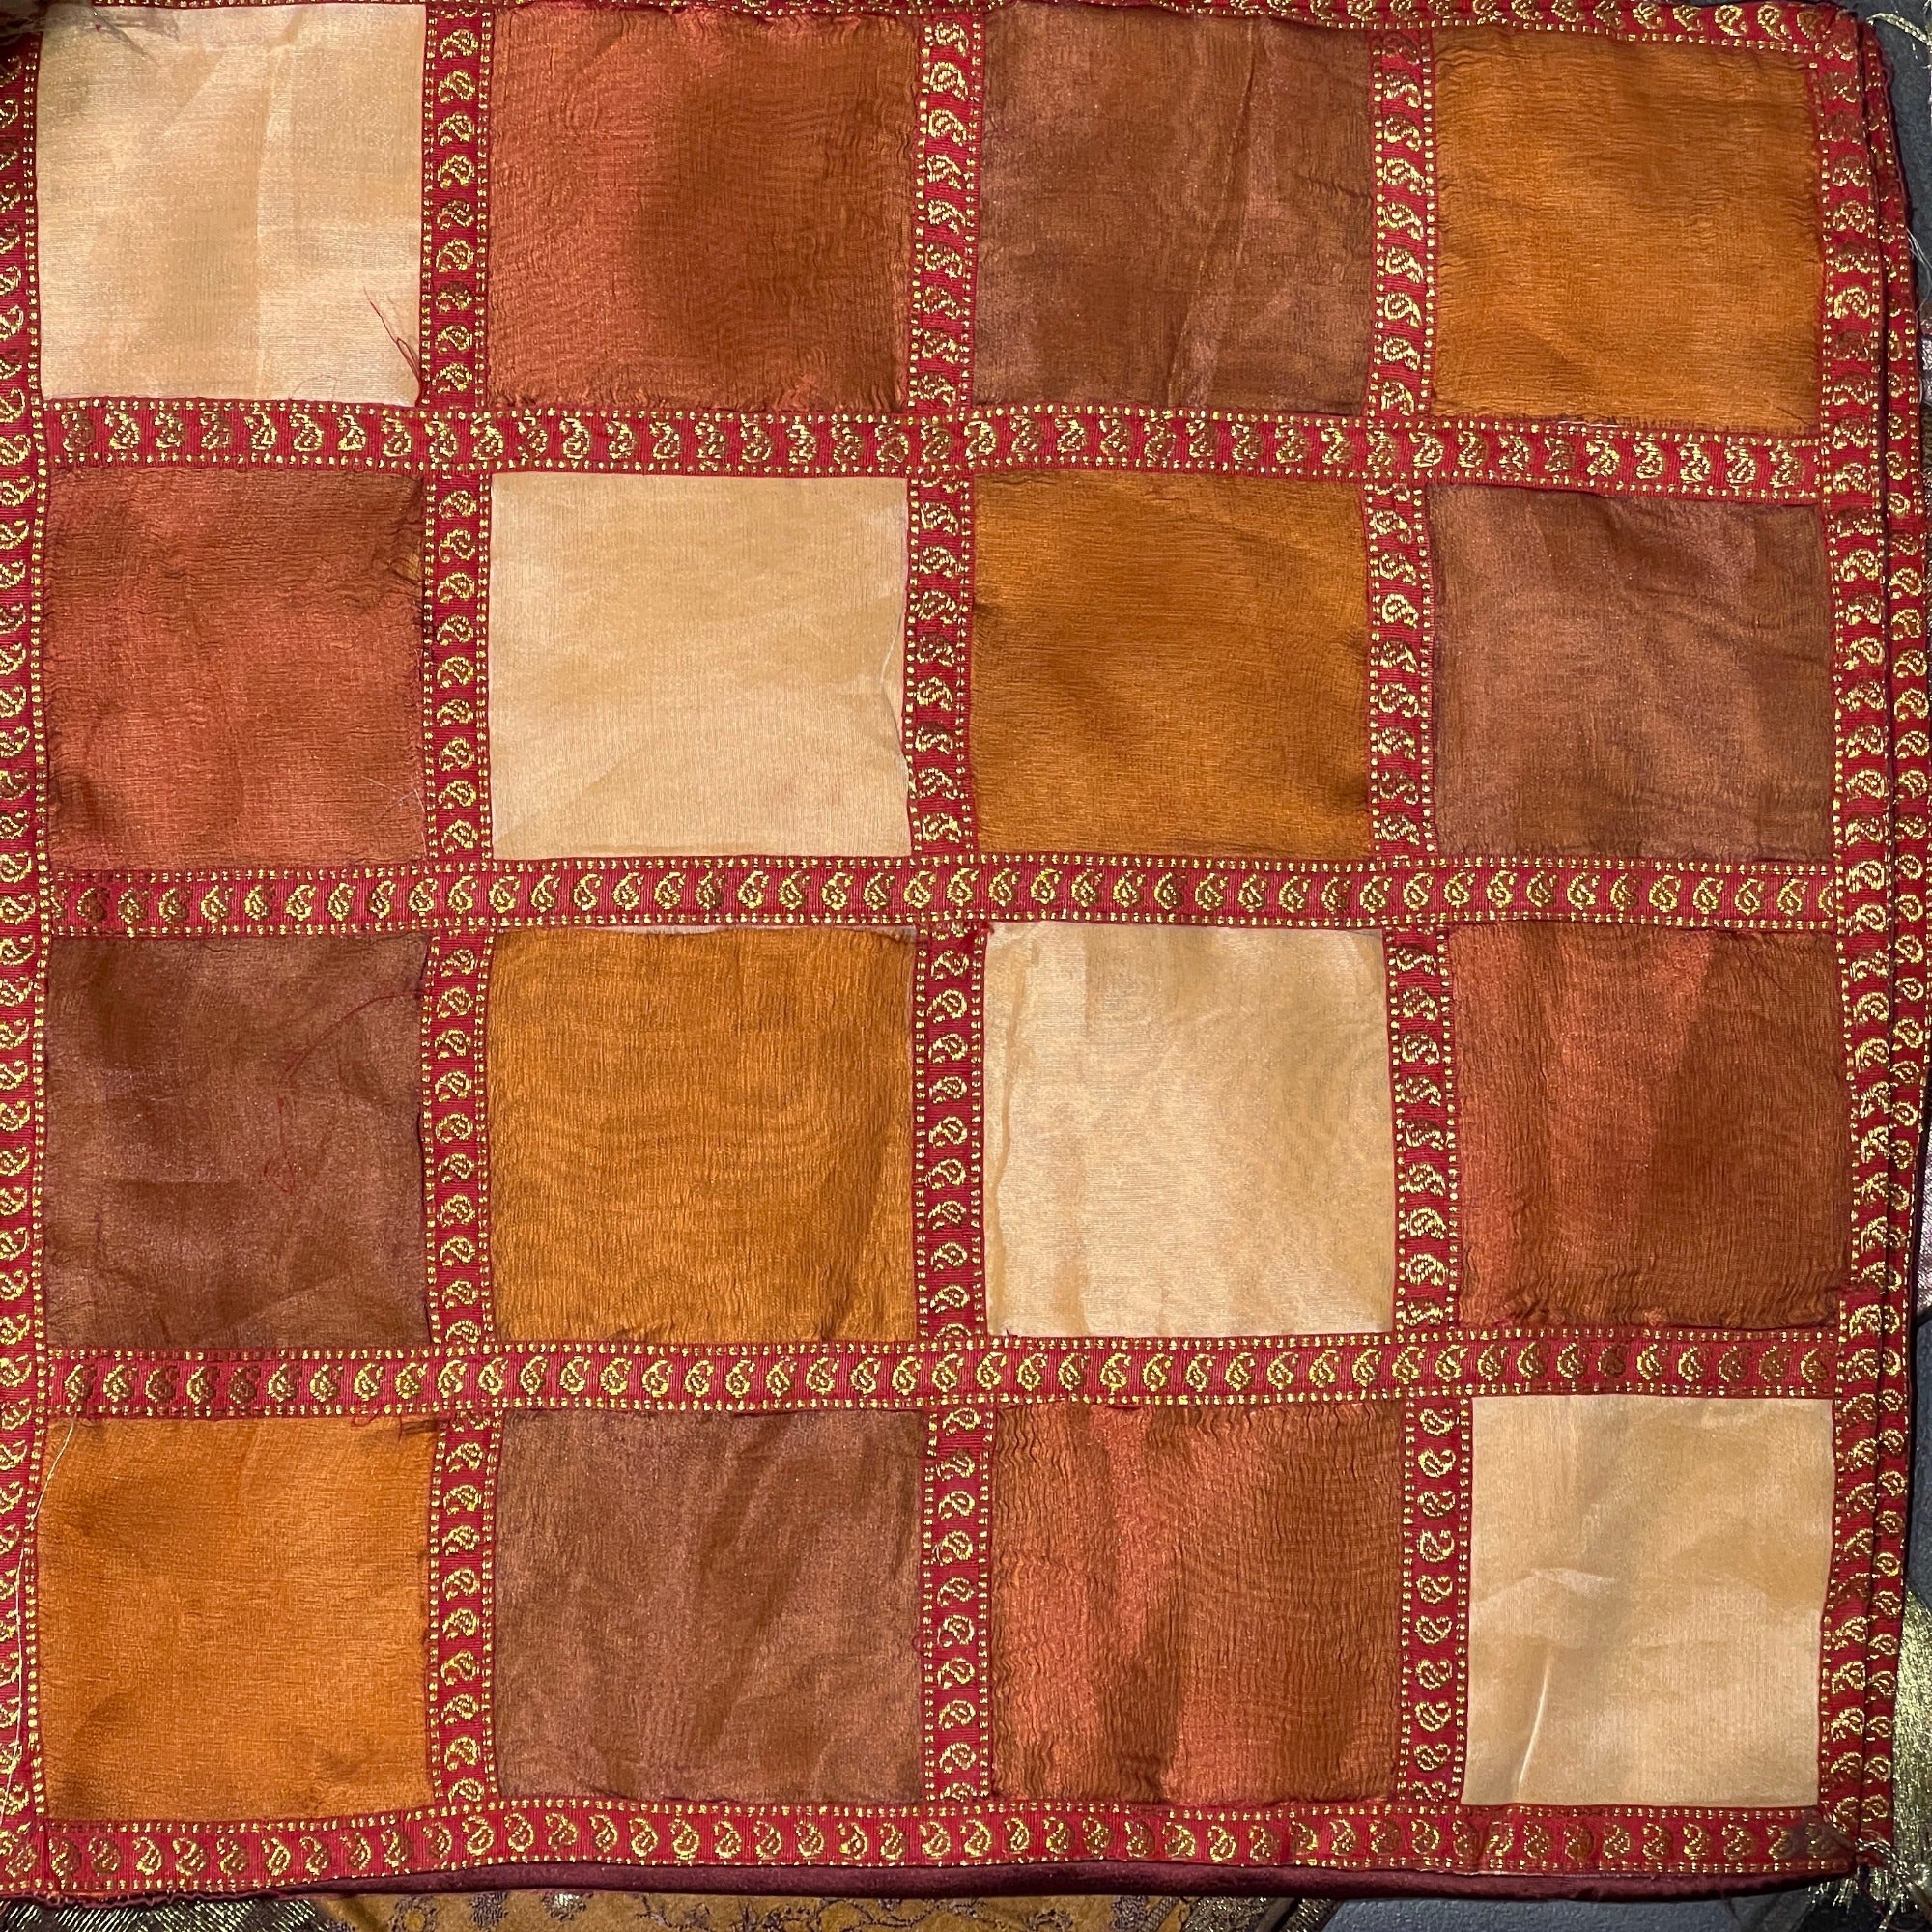 Silk Pillow Covers-Warm Tones- Many Styles - Vintage India NYC